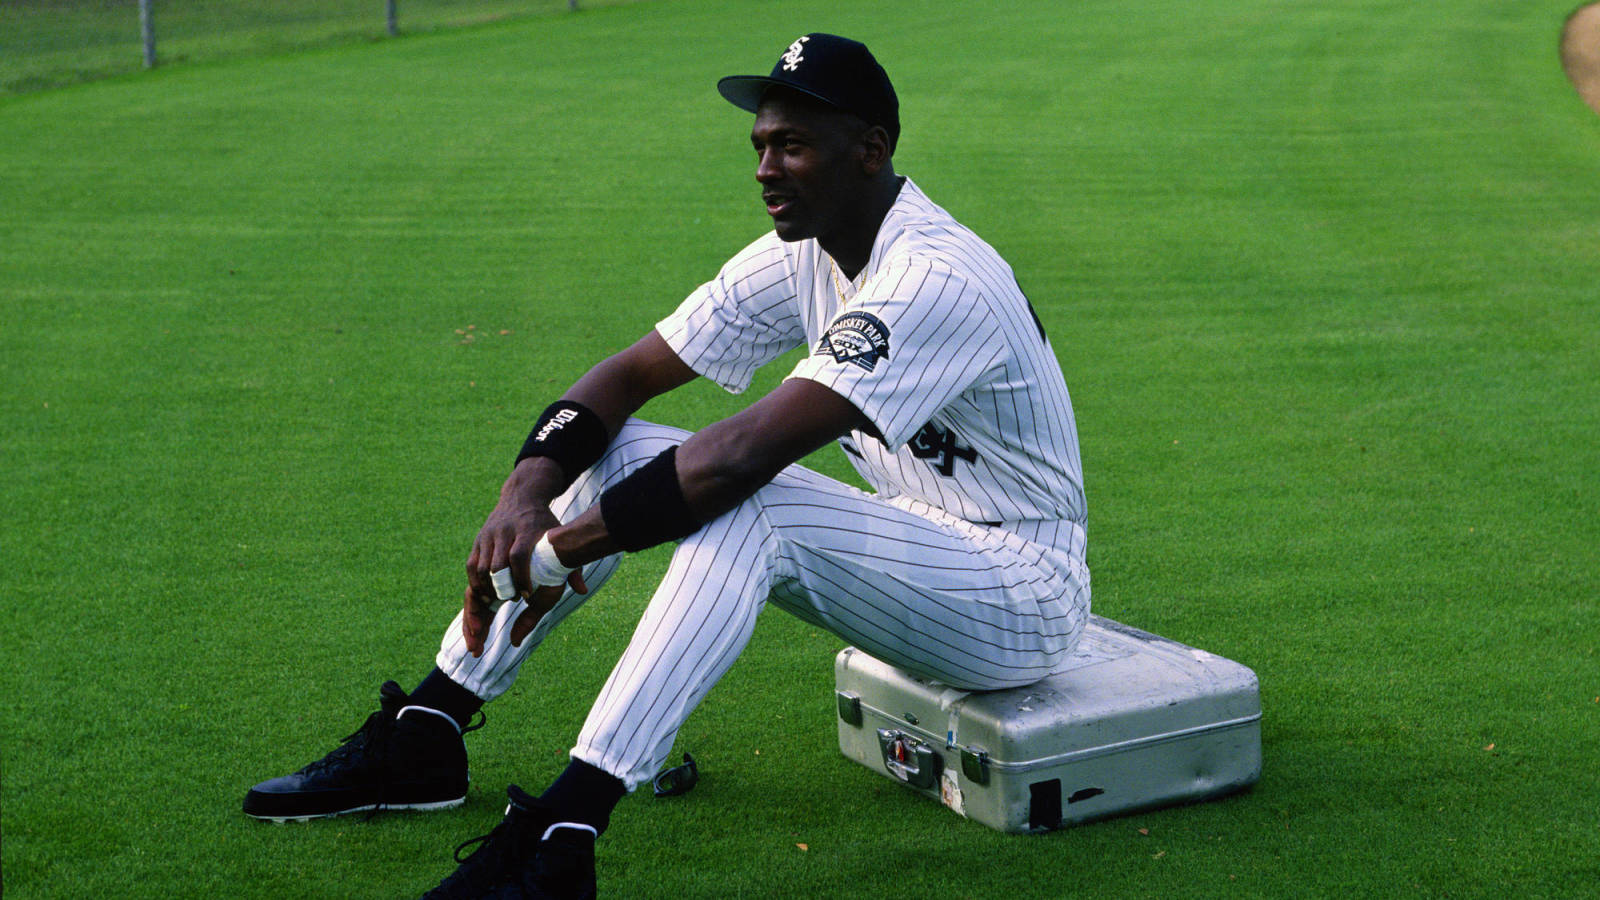 Michael Jordan's signed White Sox cleats sell for $93K